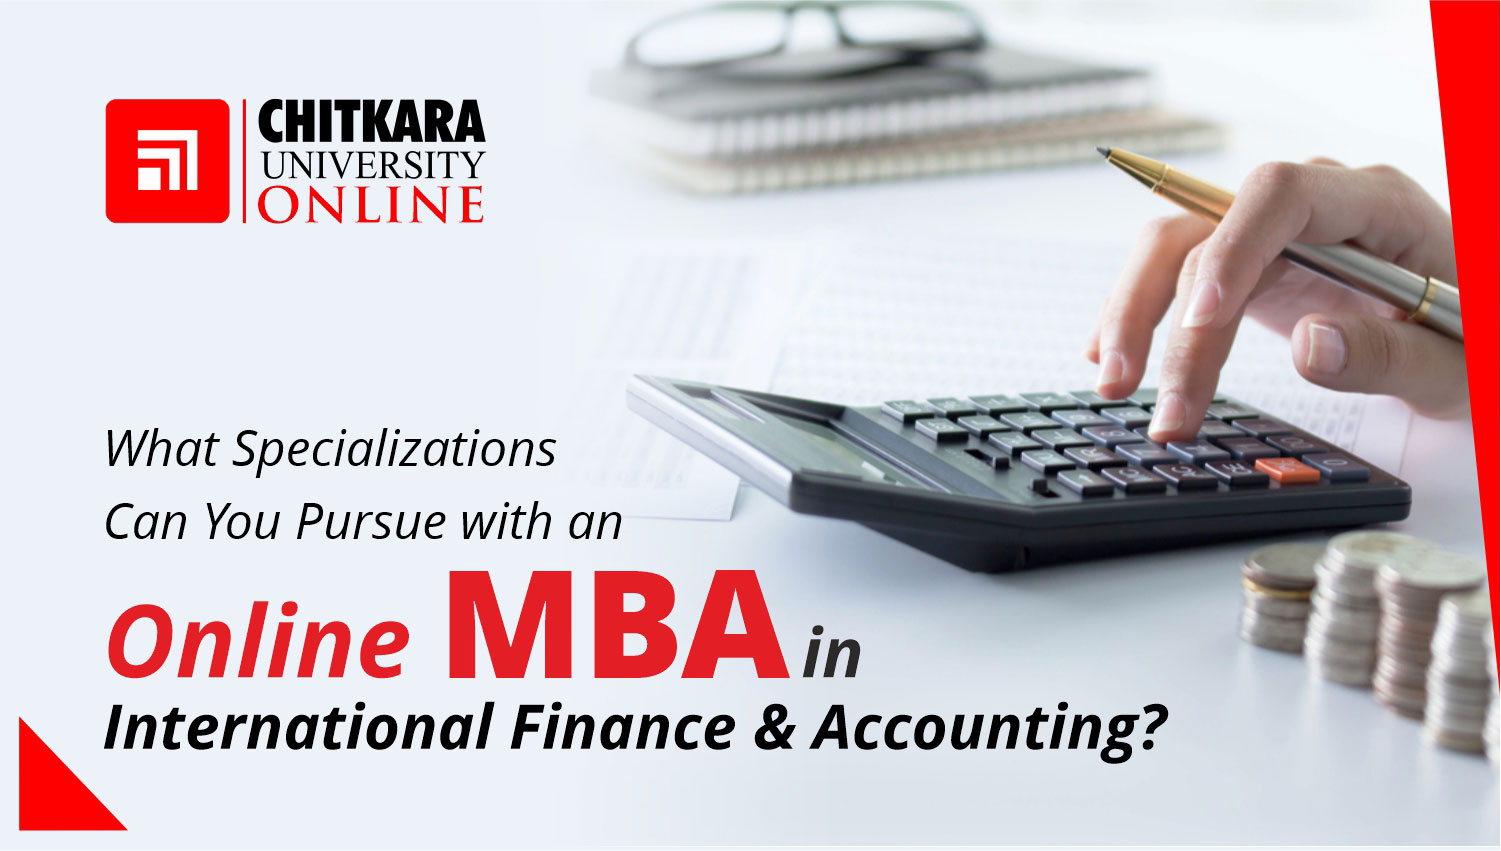 Online MBA in International Finance and Accounting - ChitkaraU Online